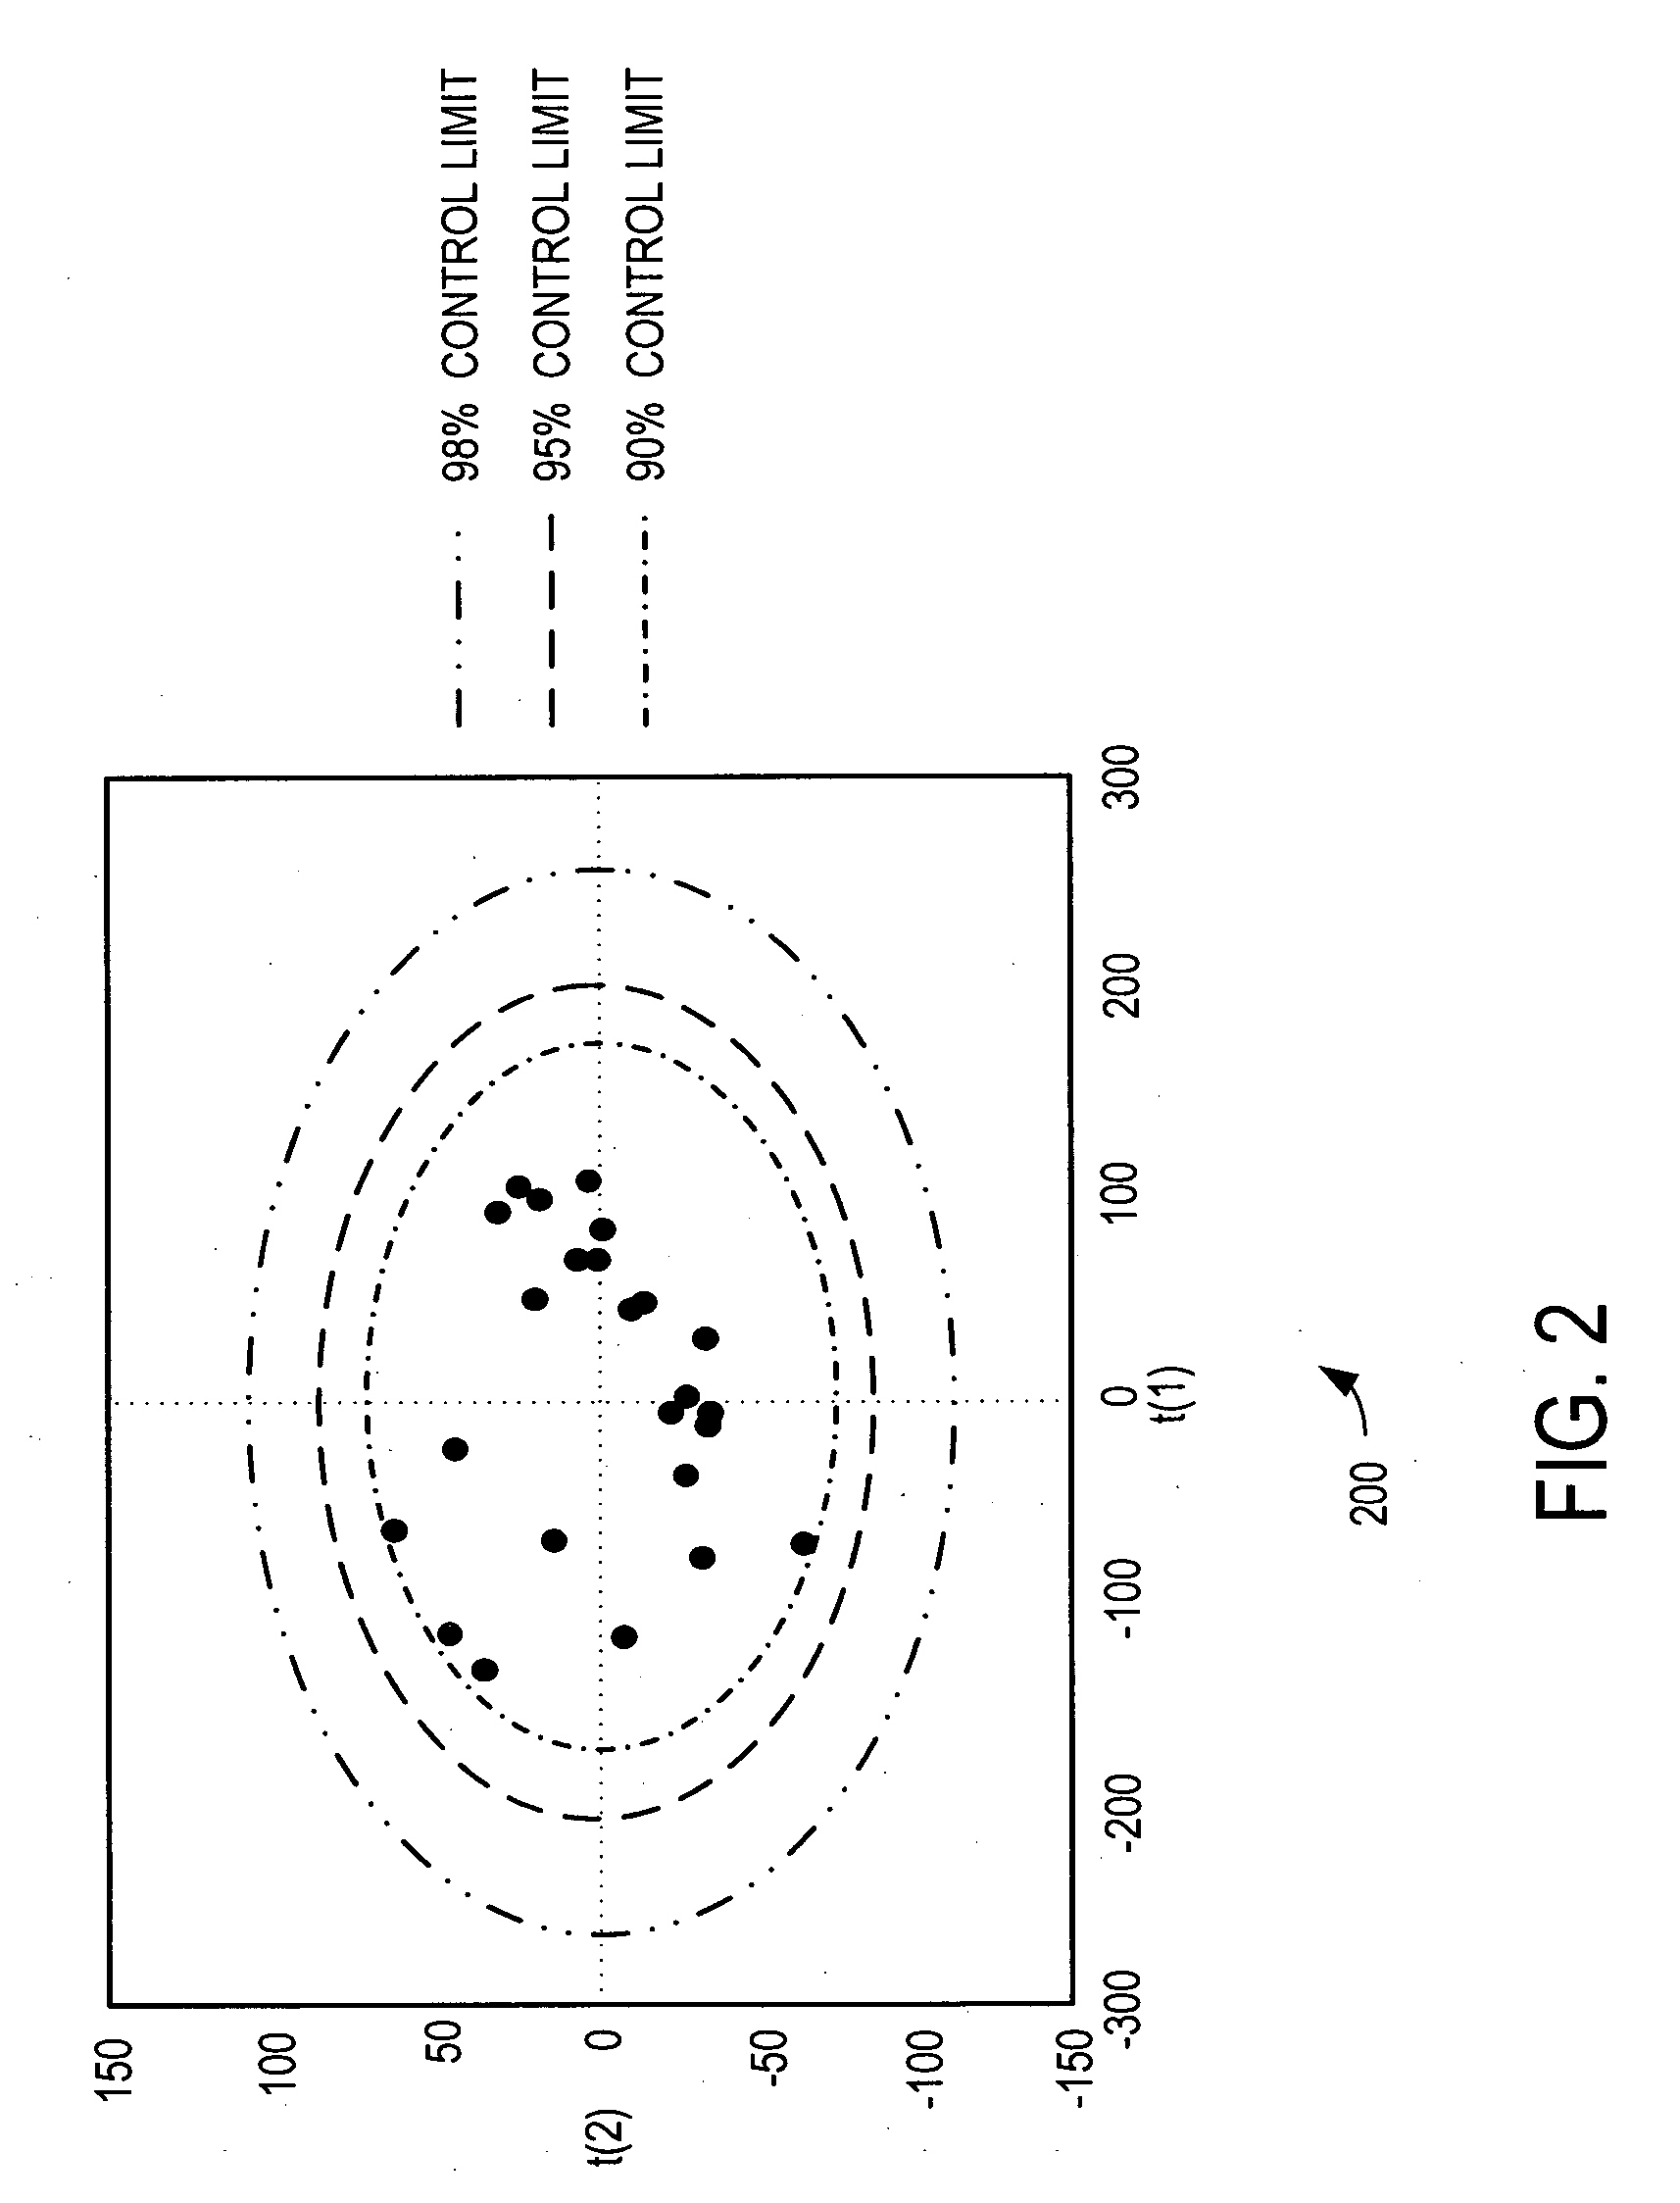 Fault detection system and method using multiway principal component analysis